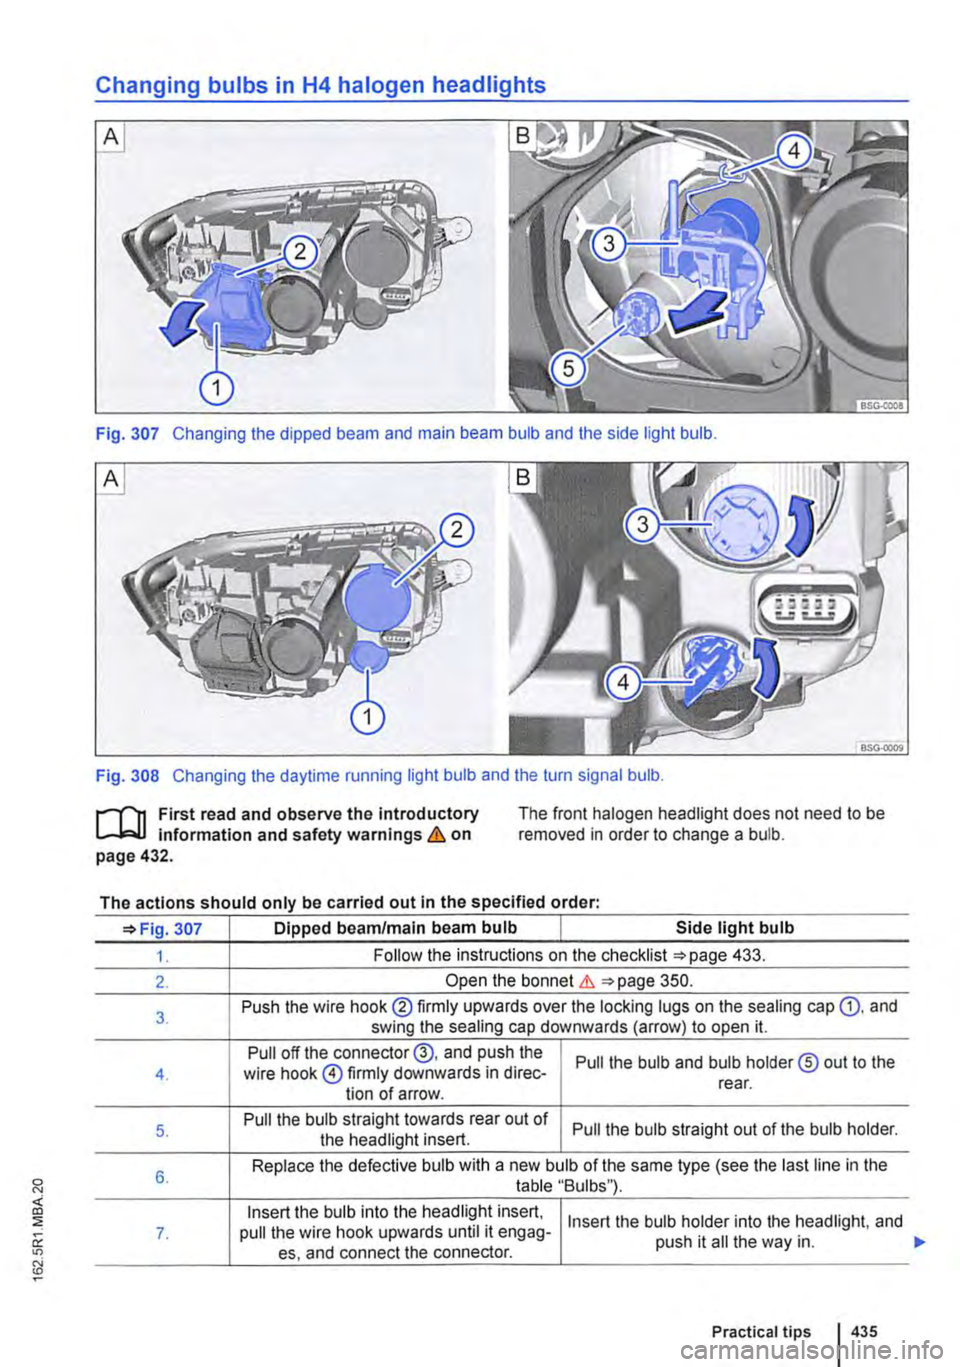 VOLKSWAGEN TRANSPORTER 2020  Owners Manual Changing bulbs in H4 halogen headlights 
Fig. 307 Changing the dipped beam and main beam bulb and the side light bulb. 
Fig. 308 Changing the daytime running light bulb and the turn signal bulb. 
r-f"